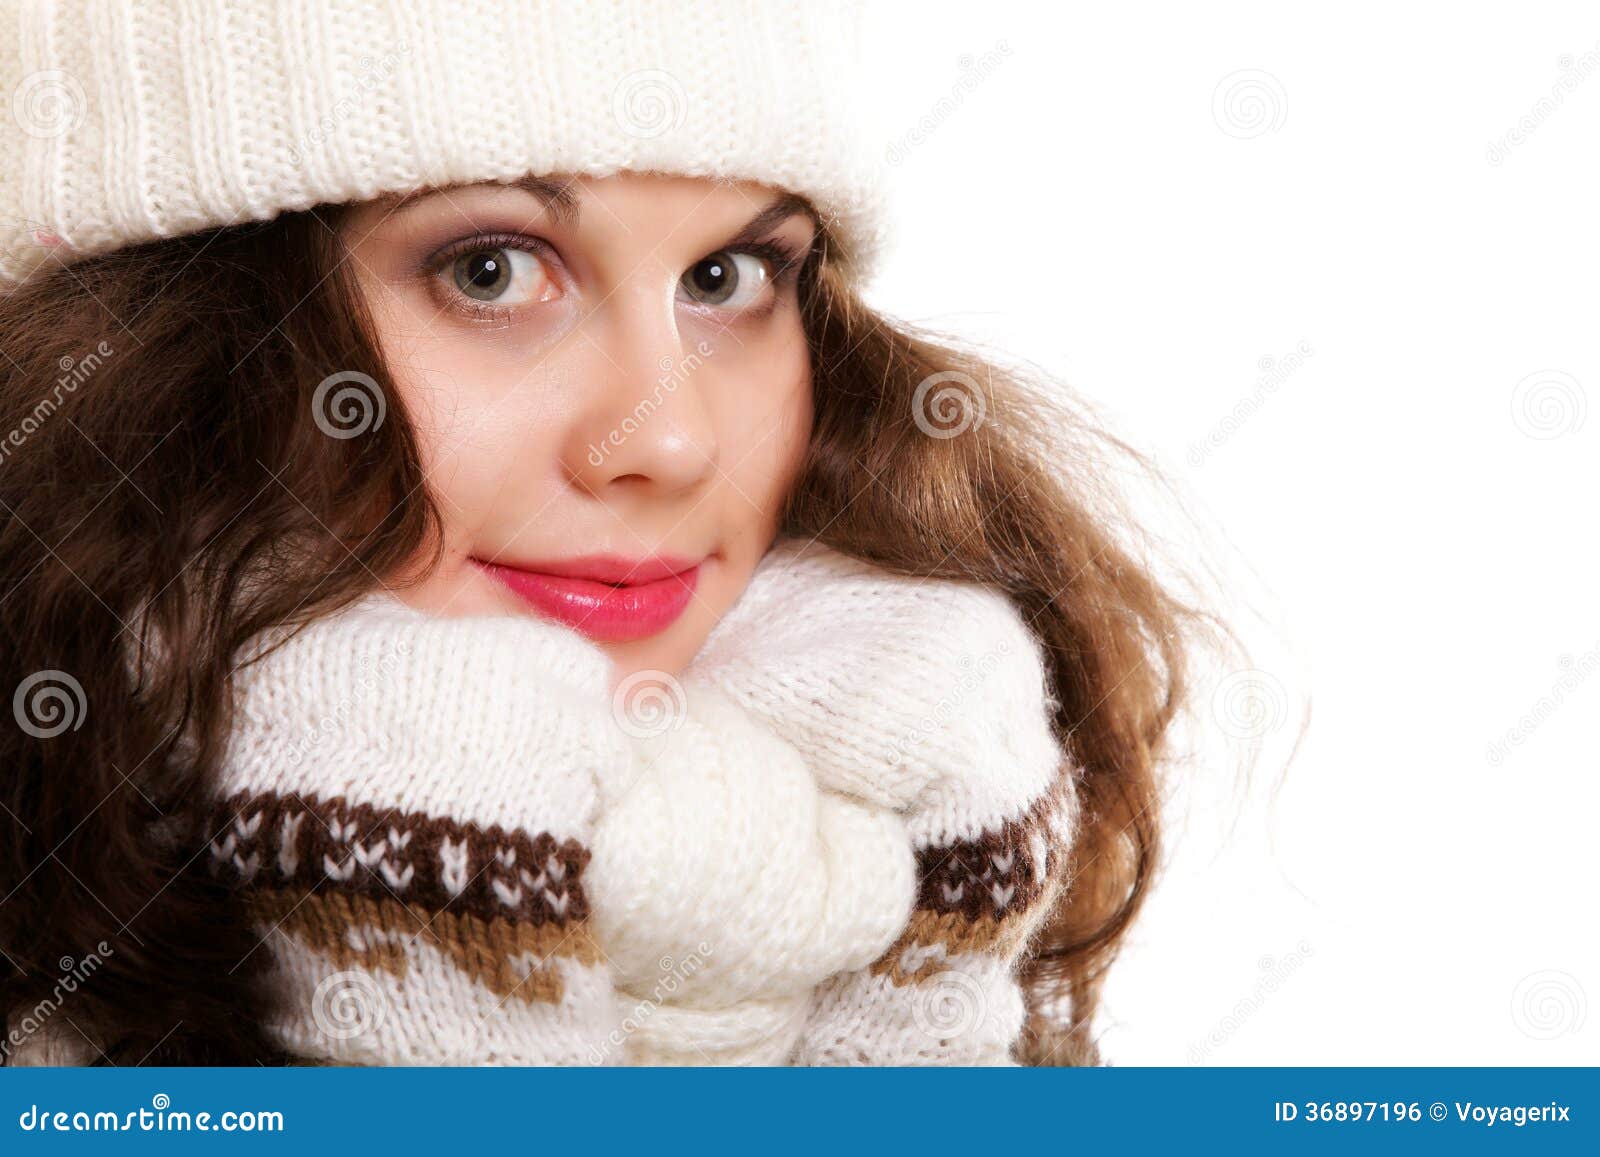 Woman in Warm Clothing Winter Fashion Stock Photo - Image of mitten ...